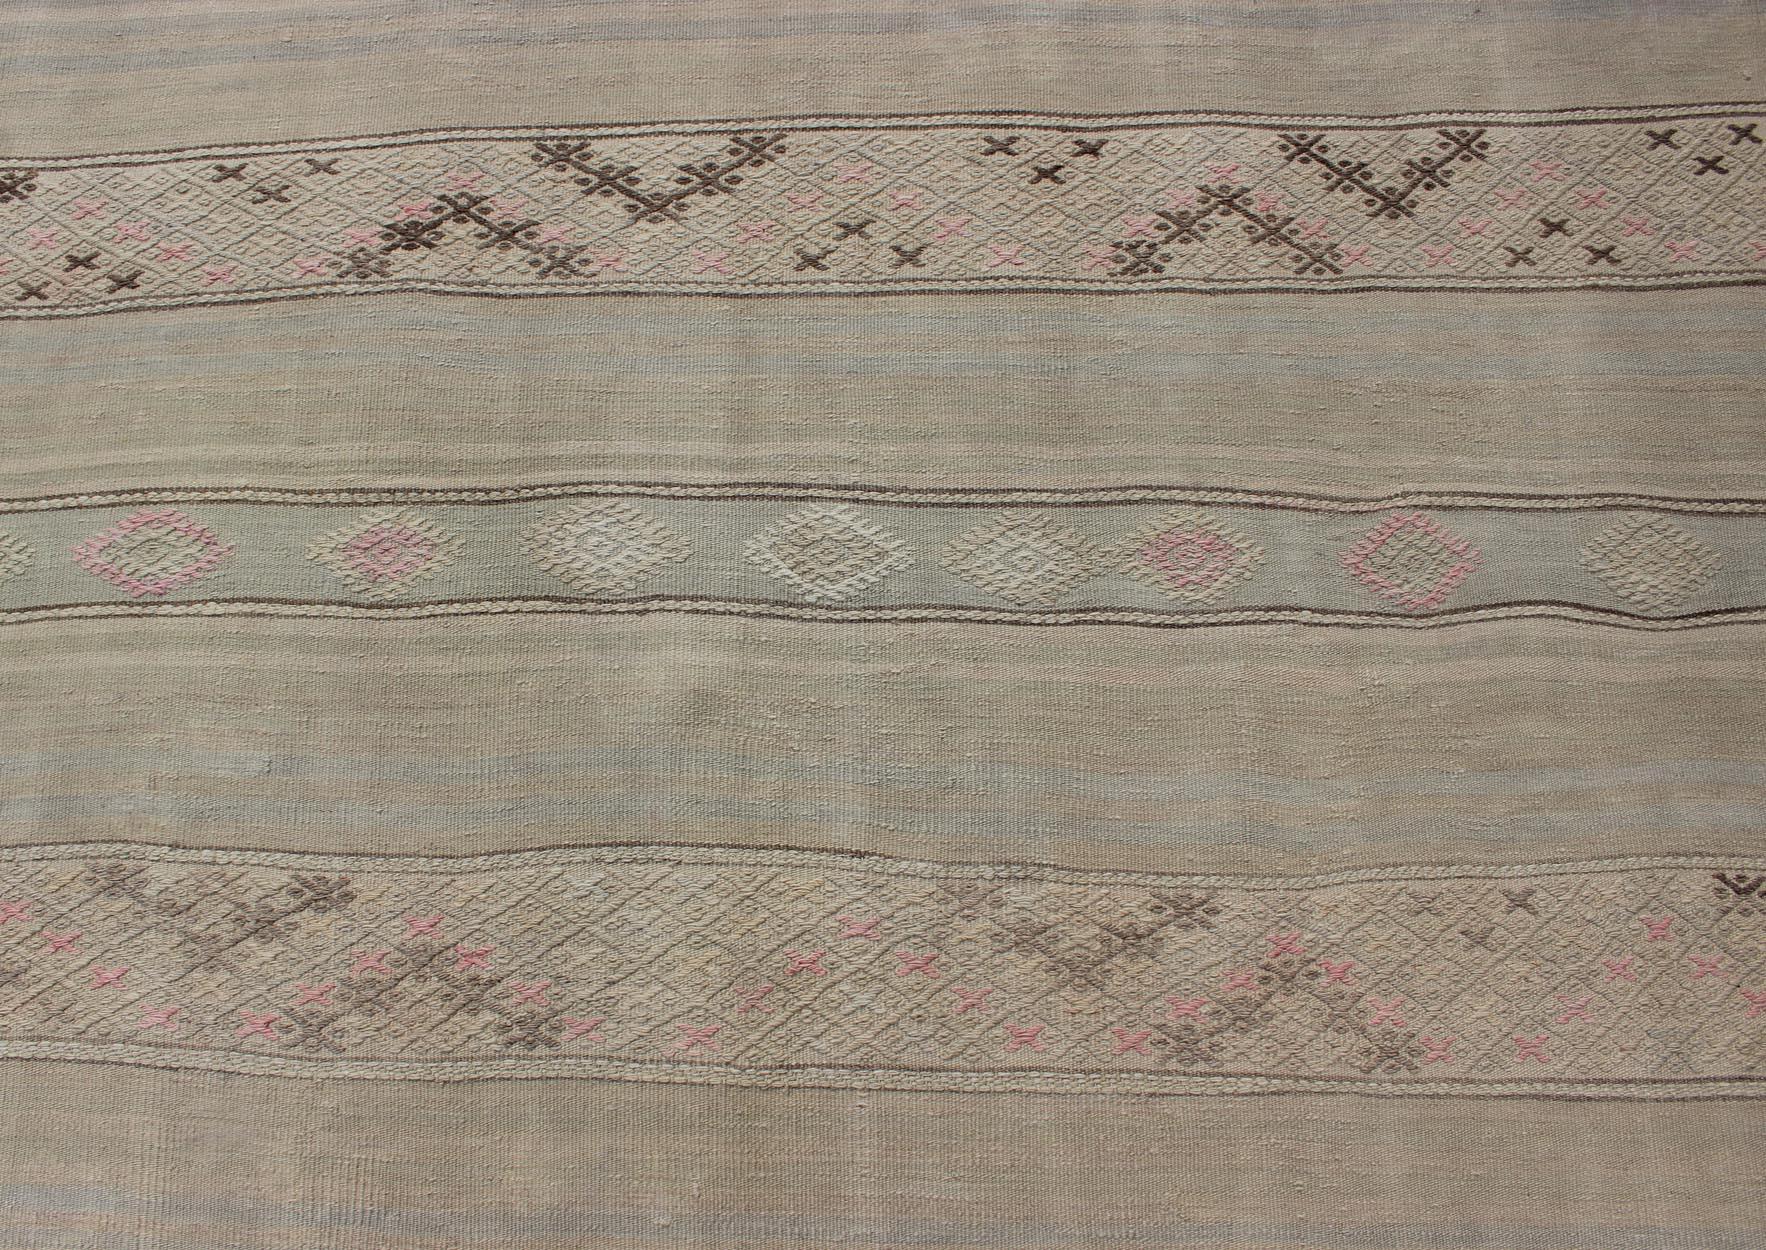 Vintage Turkish Flat-Weave Striped Kilim in Taupe, Pink, and Light Brown For Sale 3